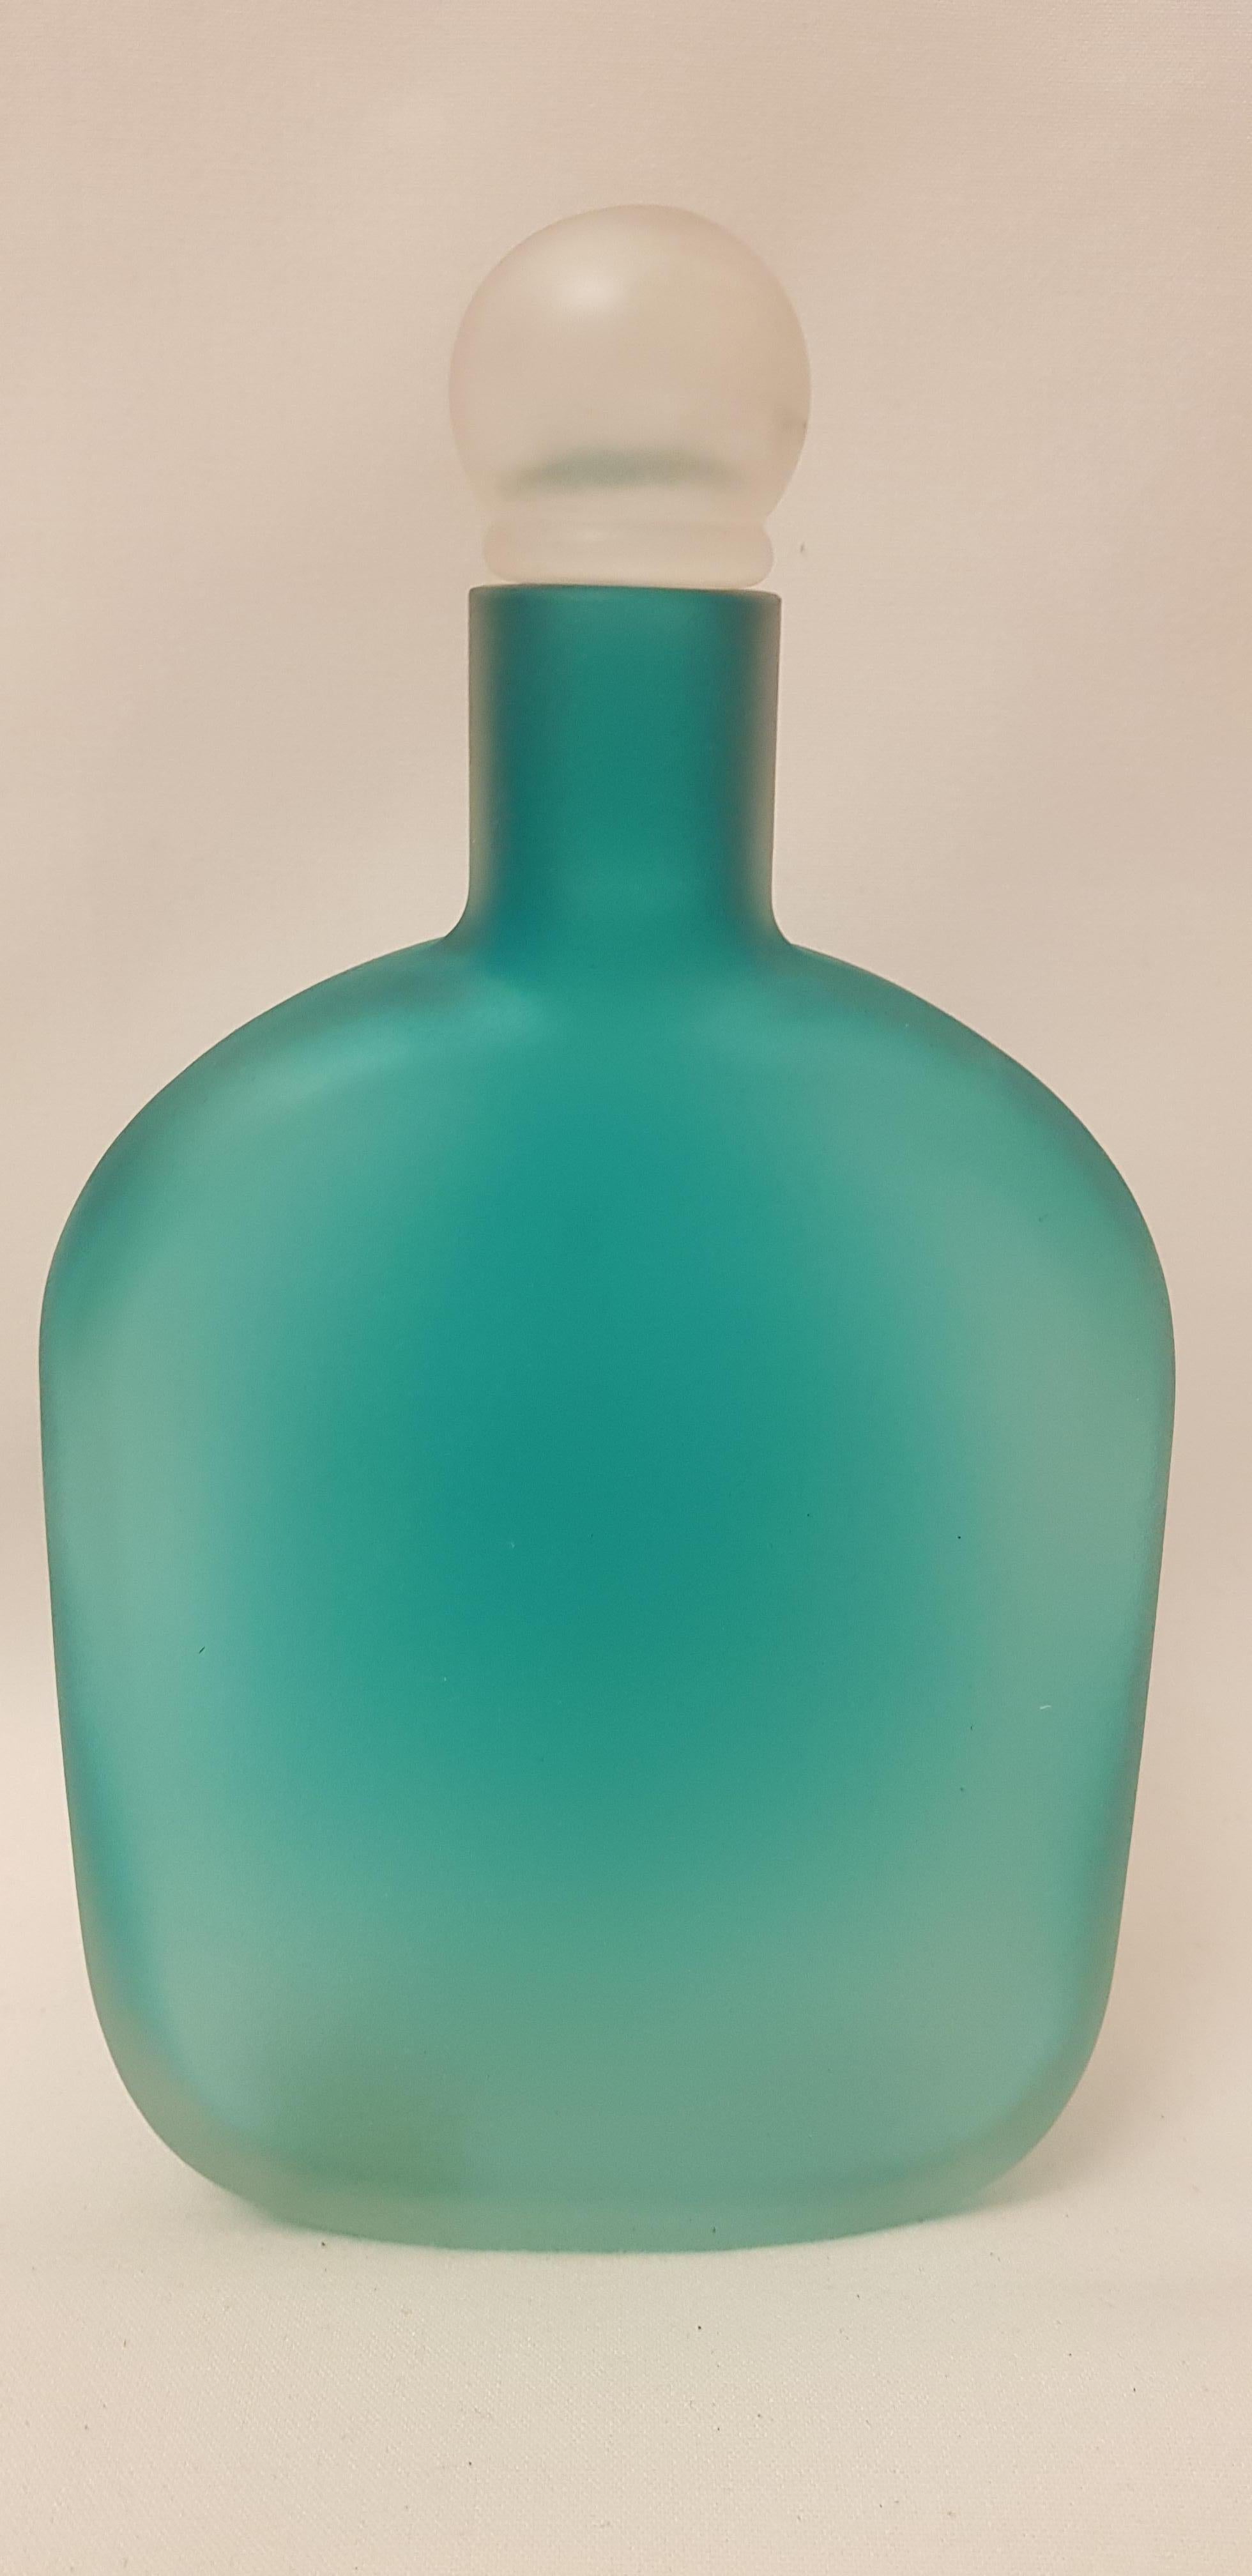 Beautiful middle of century Frosted satin turquoise Bottle, signed by Gino Cenedese, with original sticker brilliant condition.